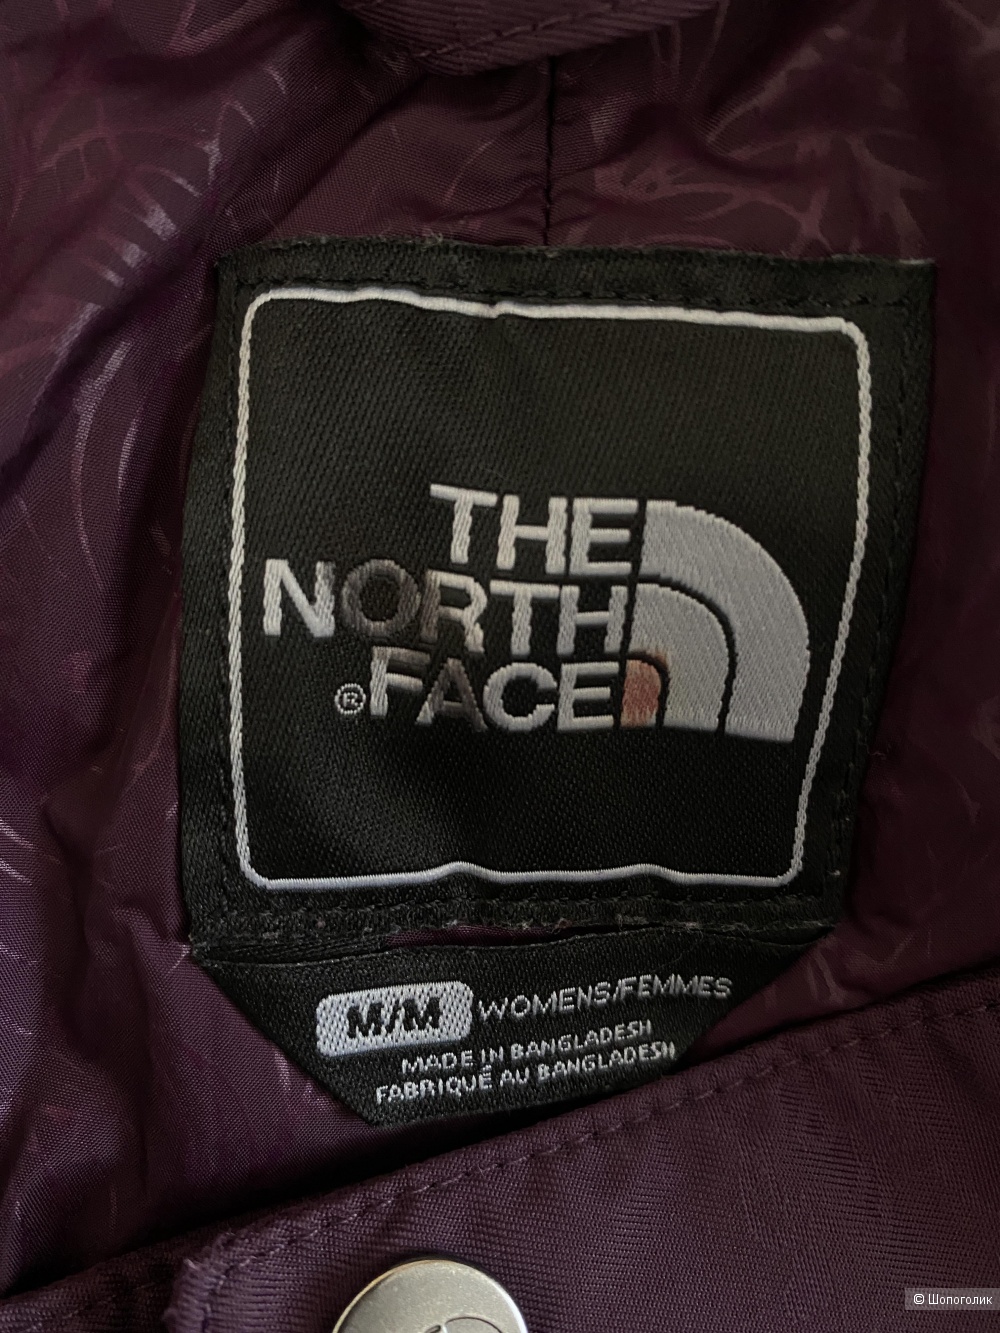 Брюки The  North face, размер М.